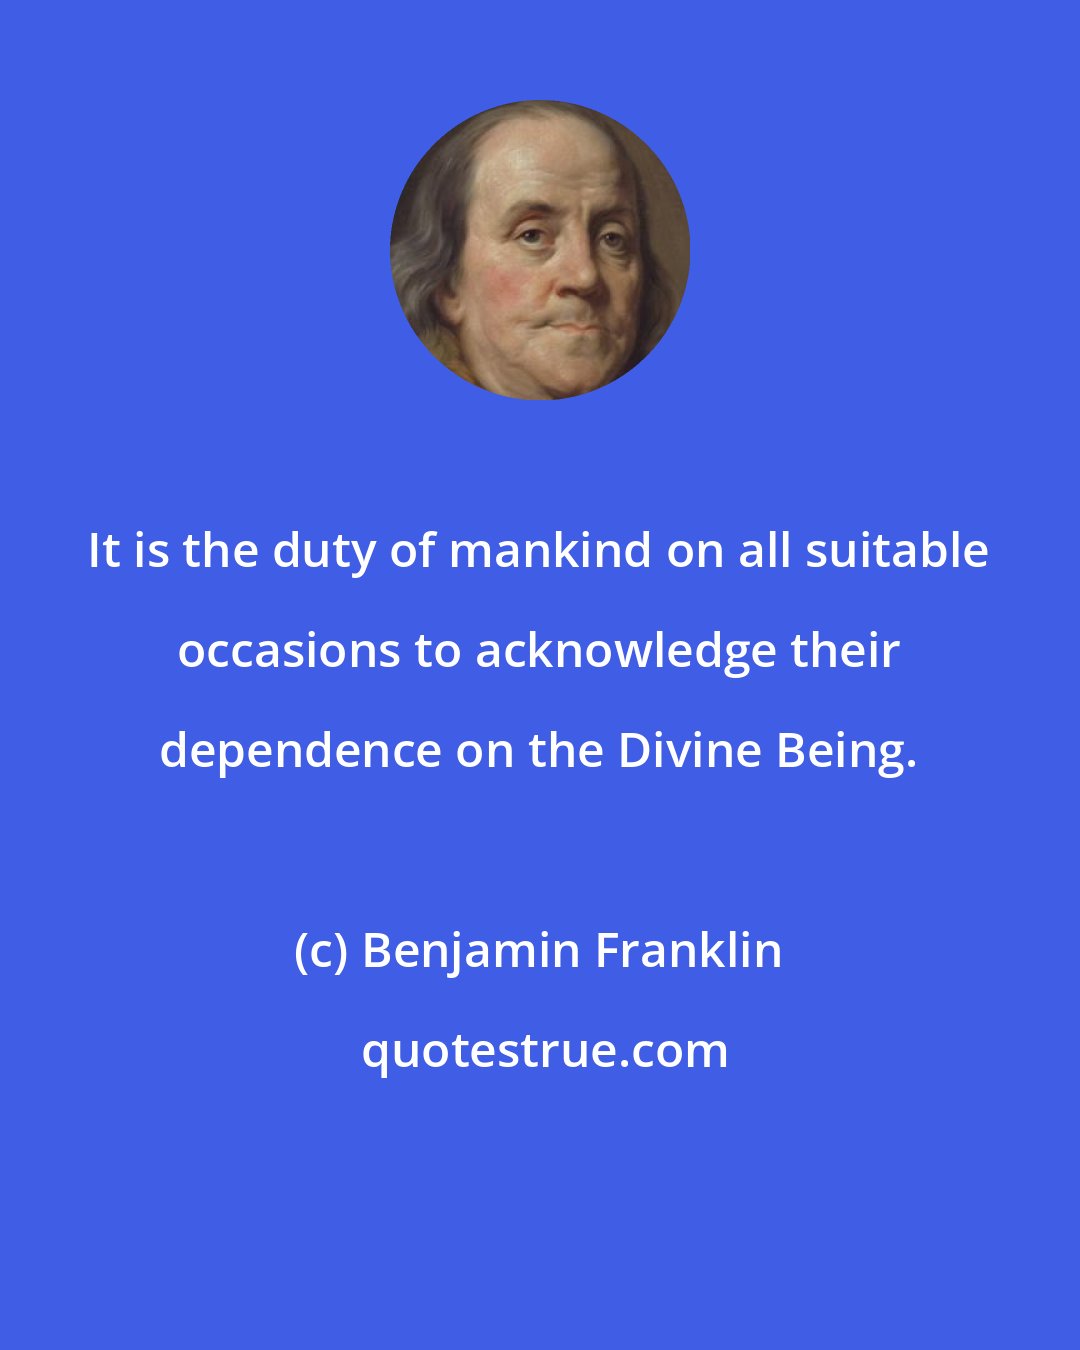 Benjamin Franklin: It is the duty of mankind on all suitable occasions to acknowledge their dependence on the Divine Being.